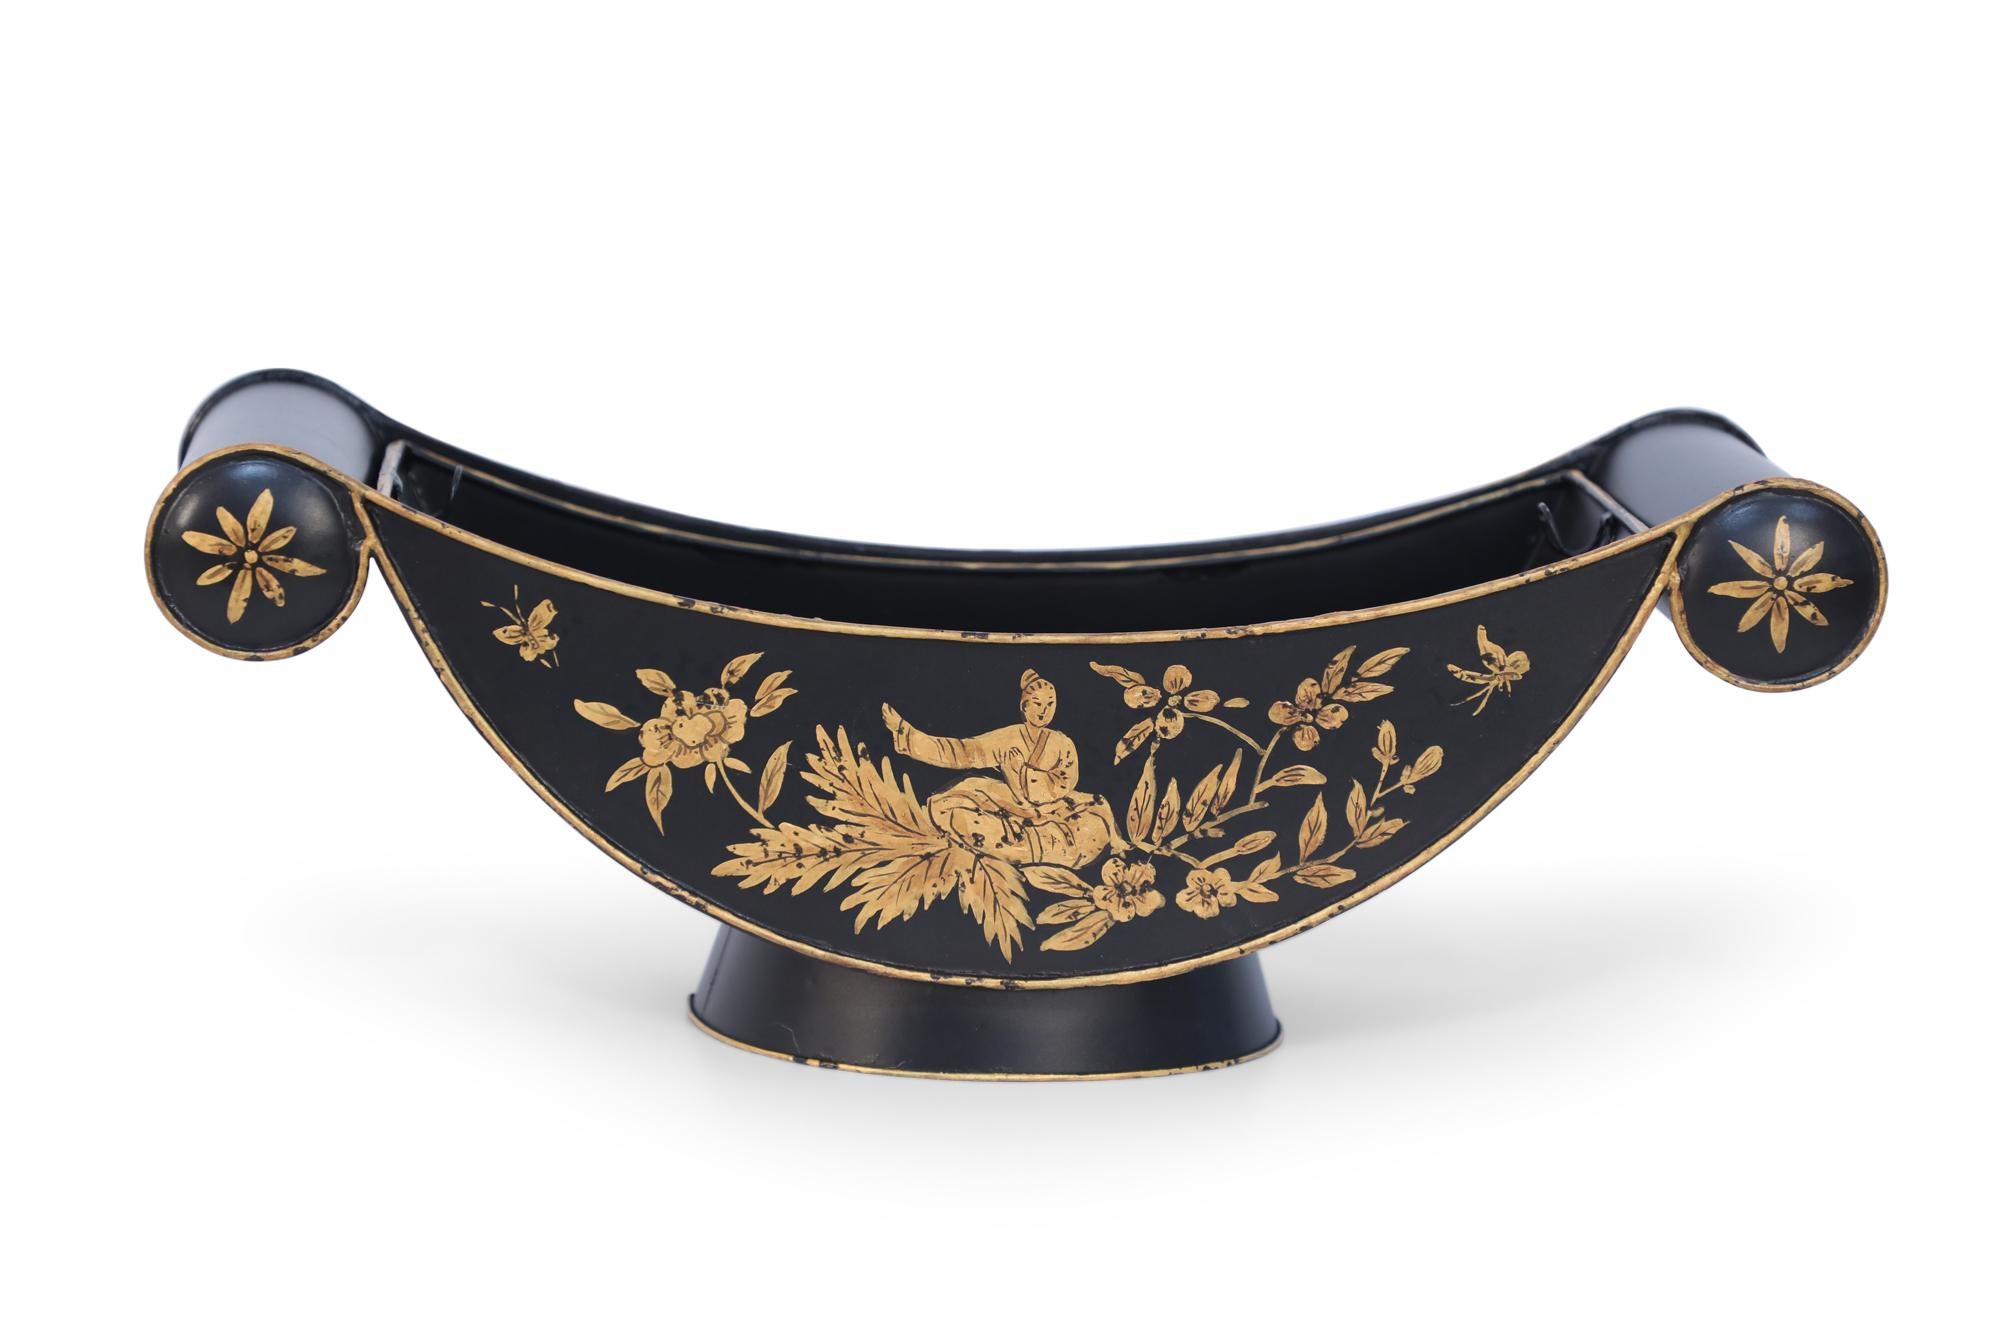 Pair of Chinese black and gold tole vessels with scrolled handles and a painted fold design of figures sitting amongst a variety of florals on a round foot with removable half-moon insert.